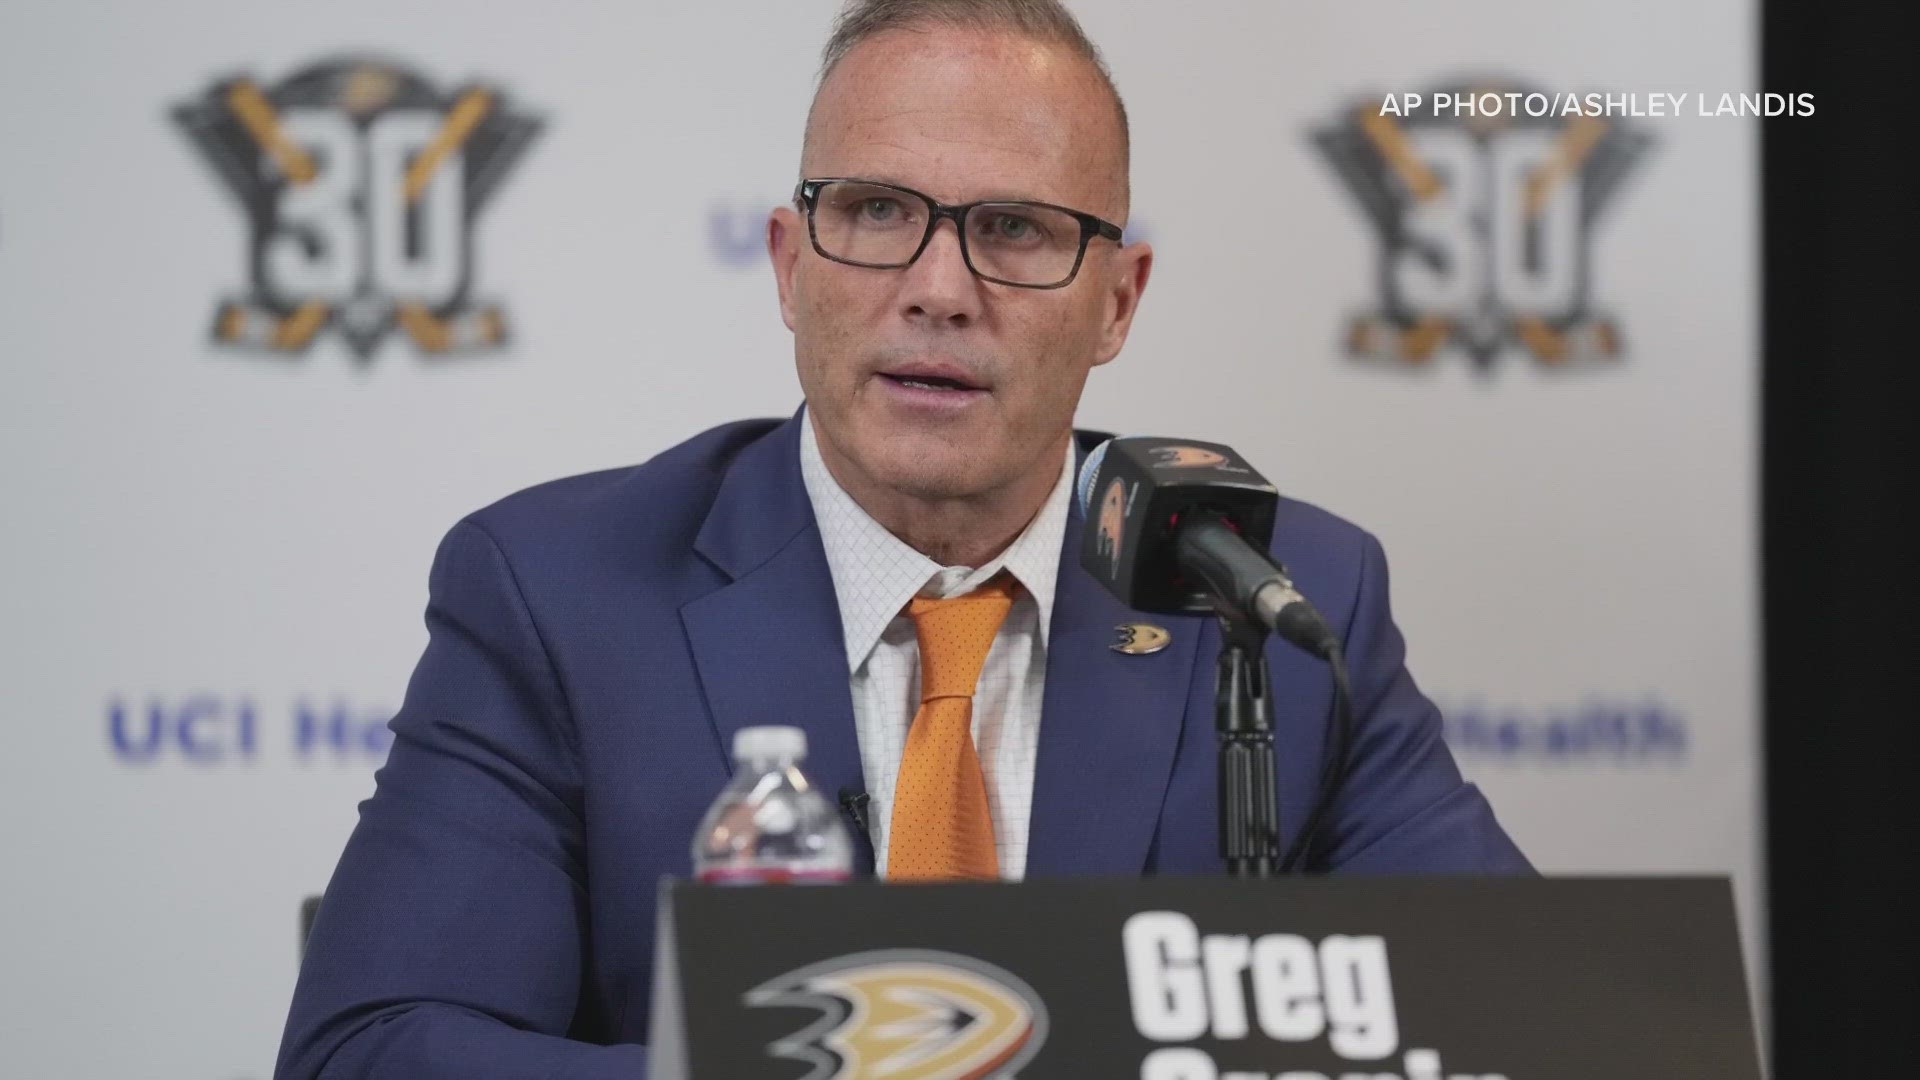 The Massachusetts native has been the head coach of the AHL's Colorado Eagles, based in Loveland, since 2018.